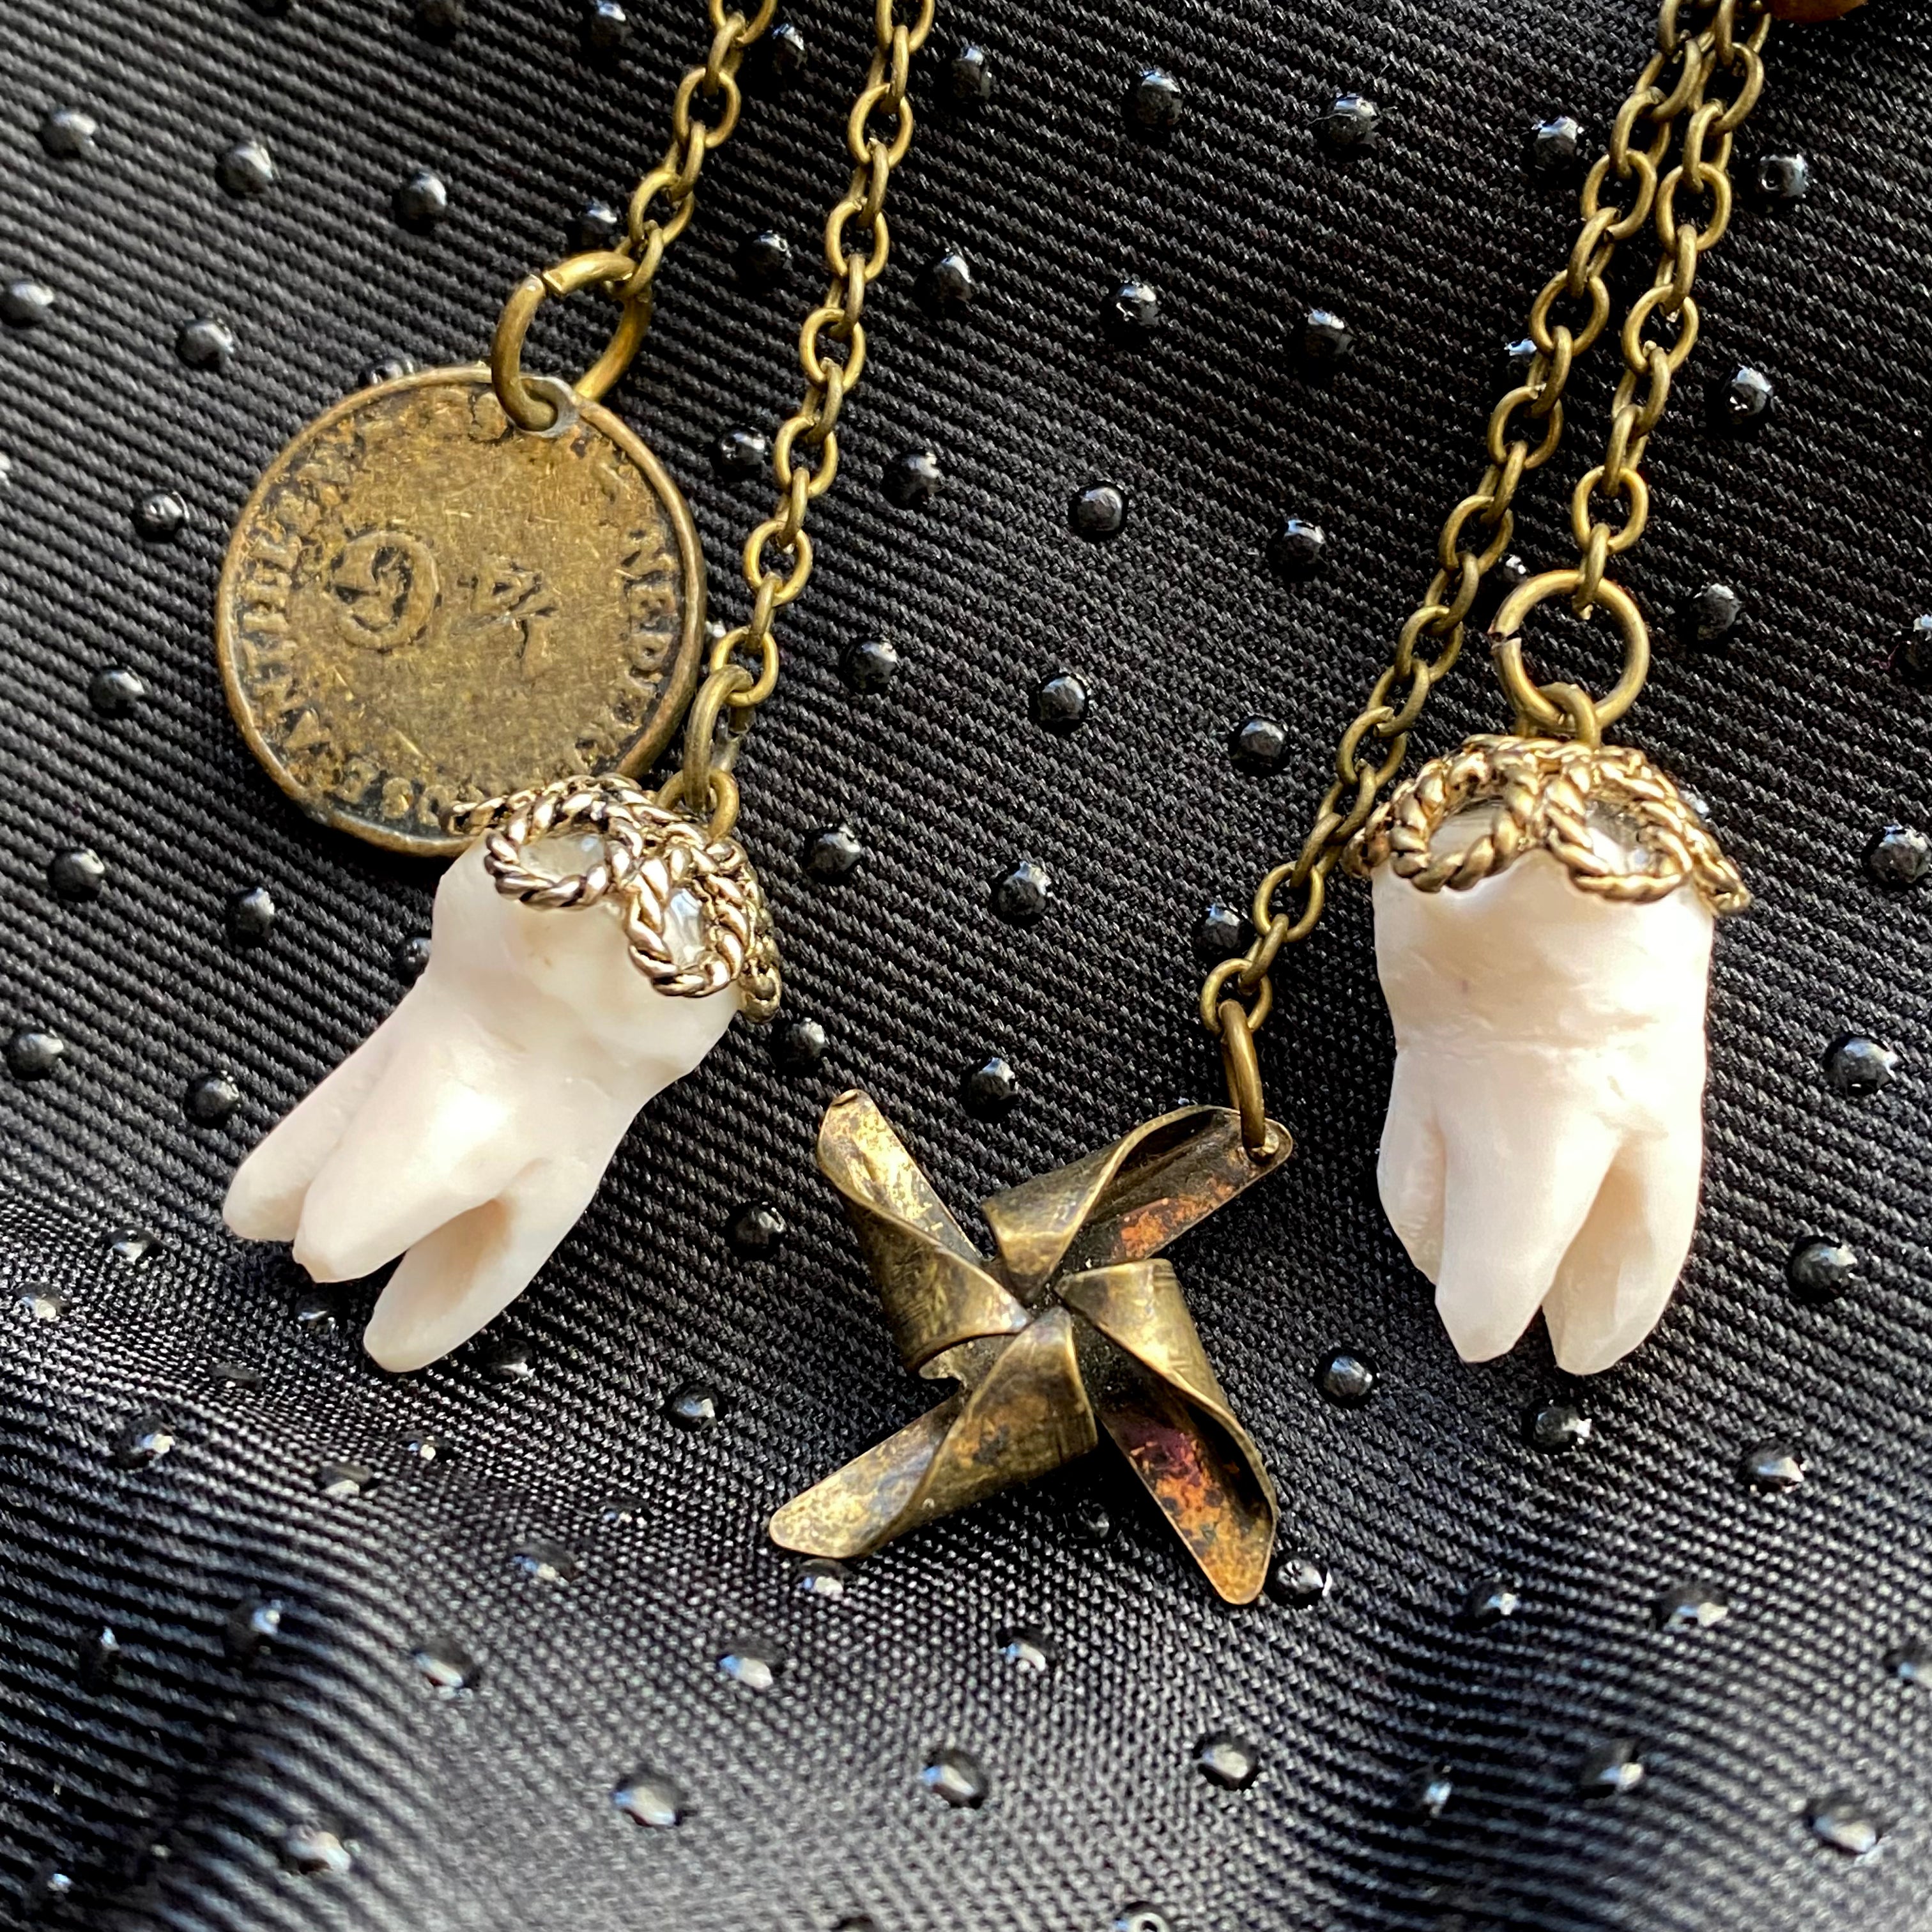 Antique Style Tooth and Charm Earrings